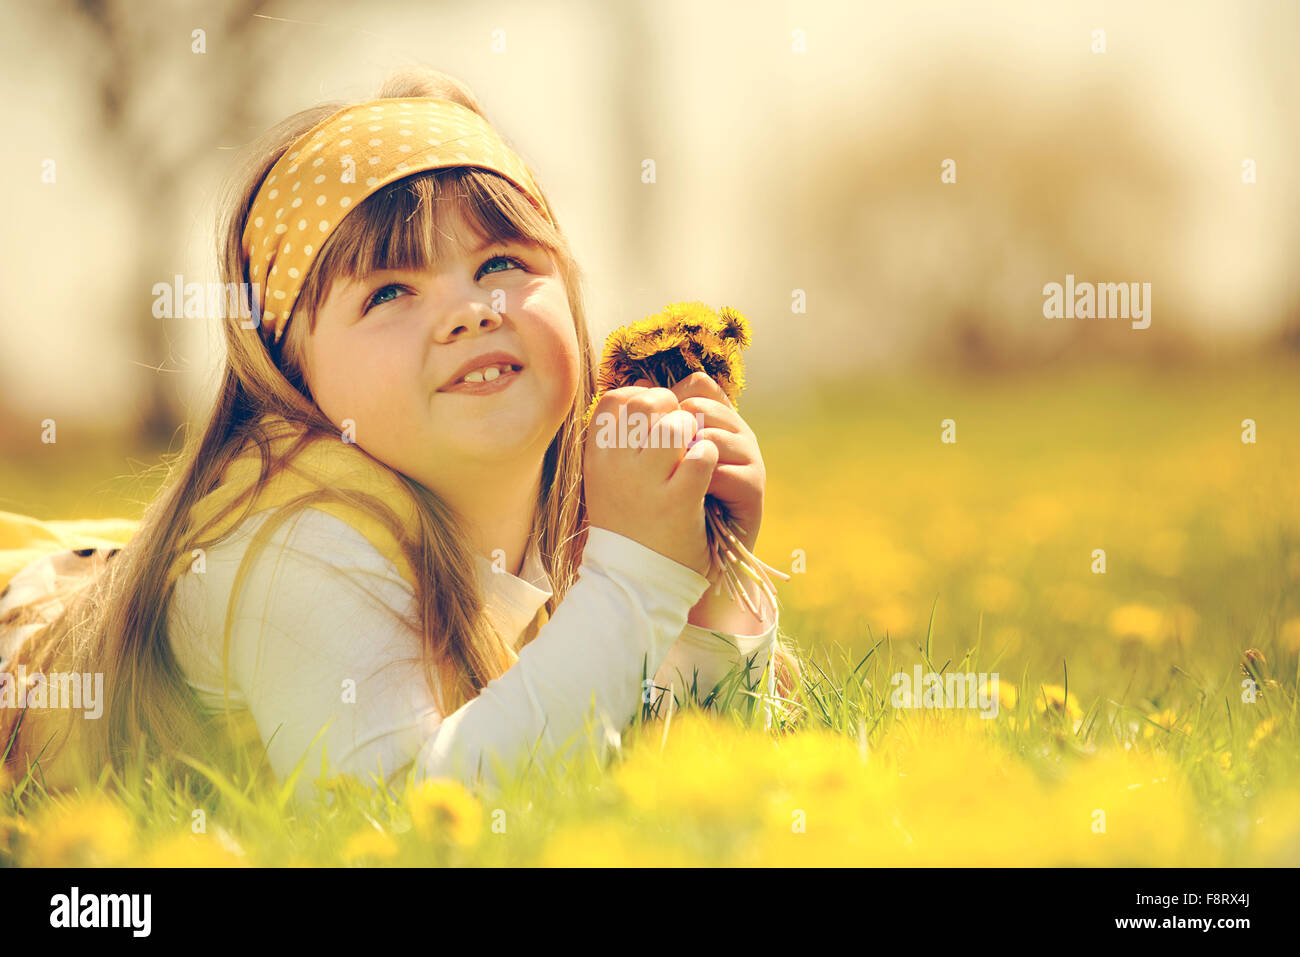 little girl enjoying the sunny spring day in fields flowers. vintage-look Stock Photo